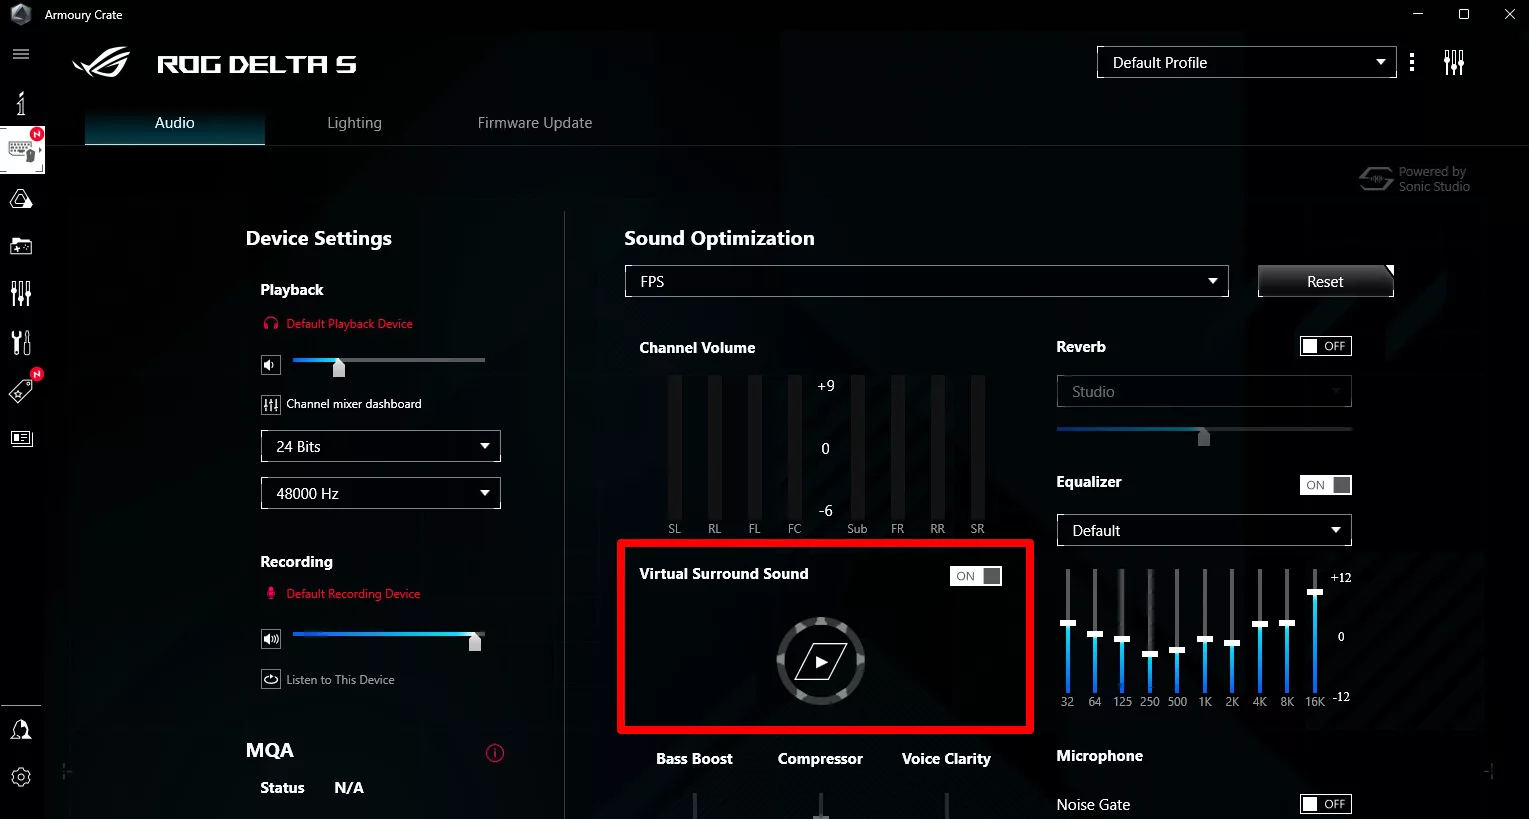 A screenshot of the ROG Delta S audio settings in Armoury Crate, with the Virtual Surround Sound option highlighted.